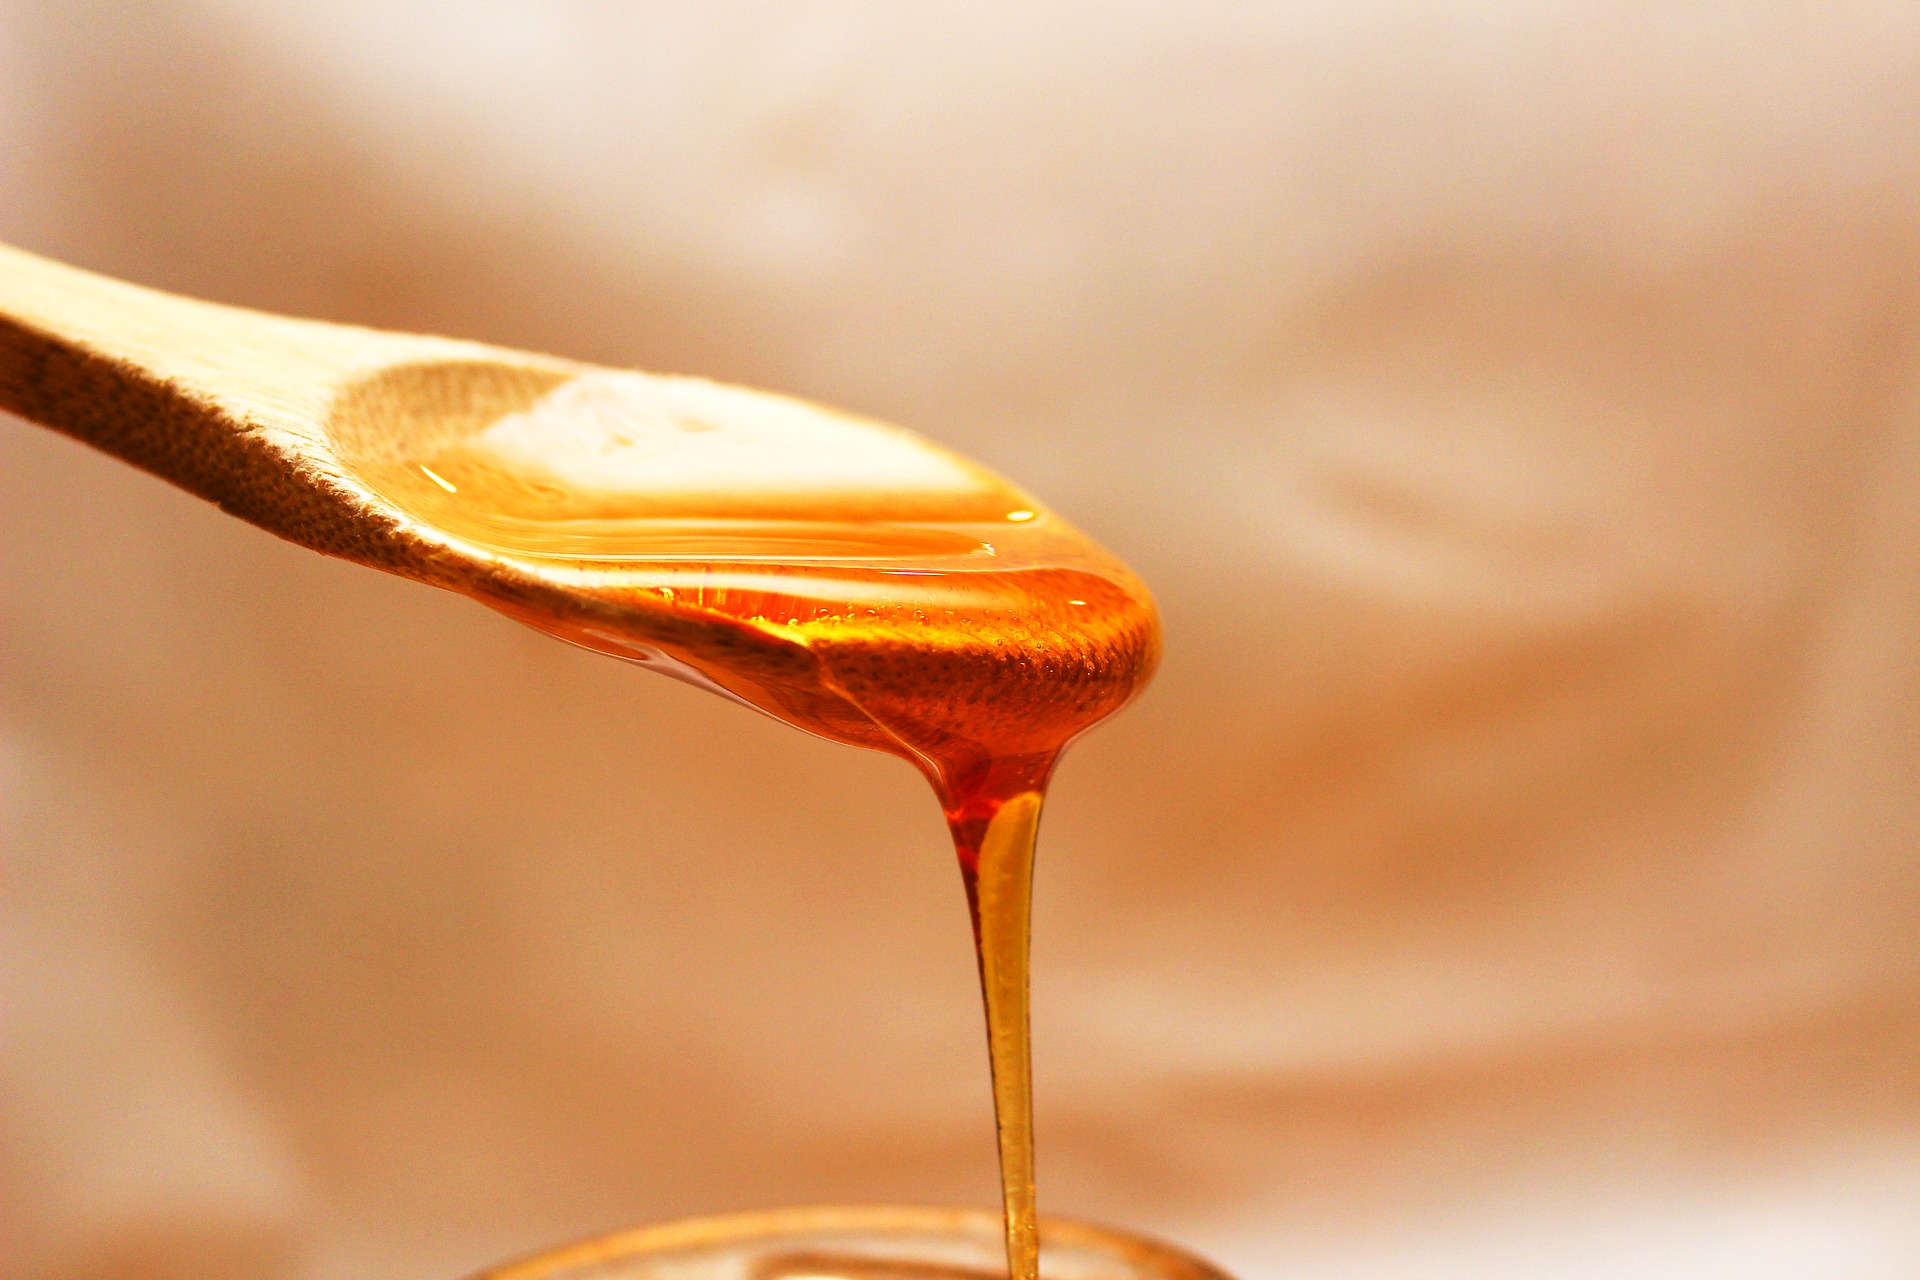 Honey: Four Corners of the Kitchen